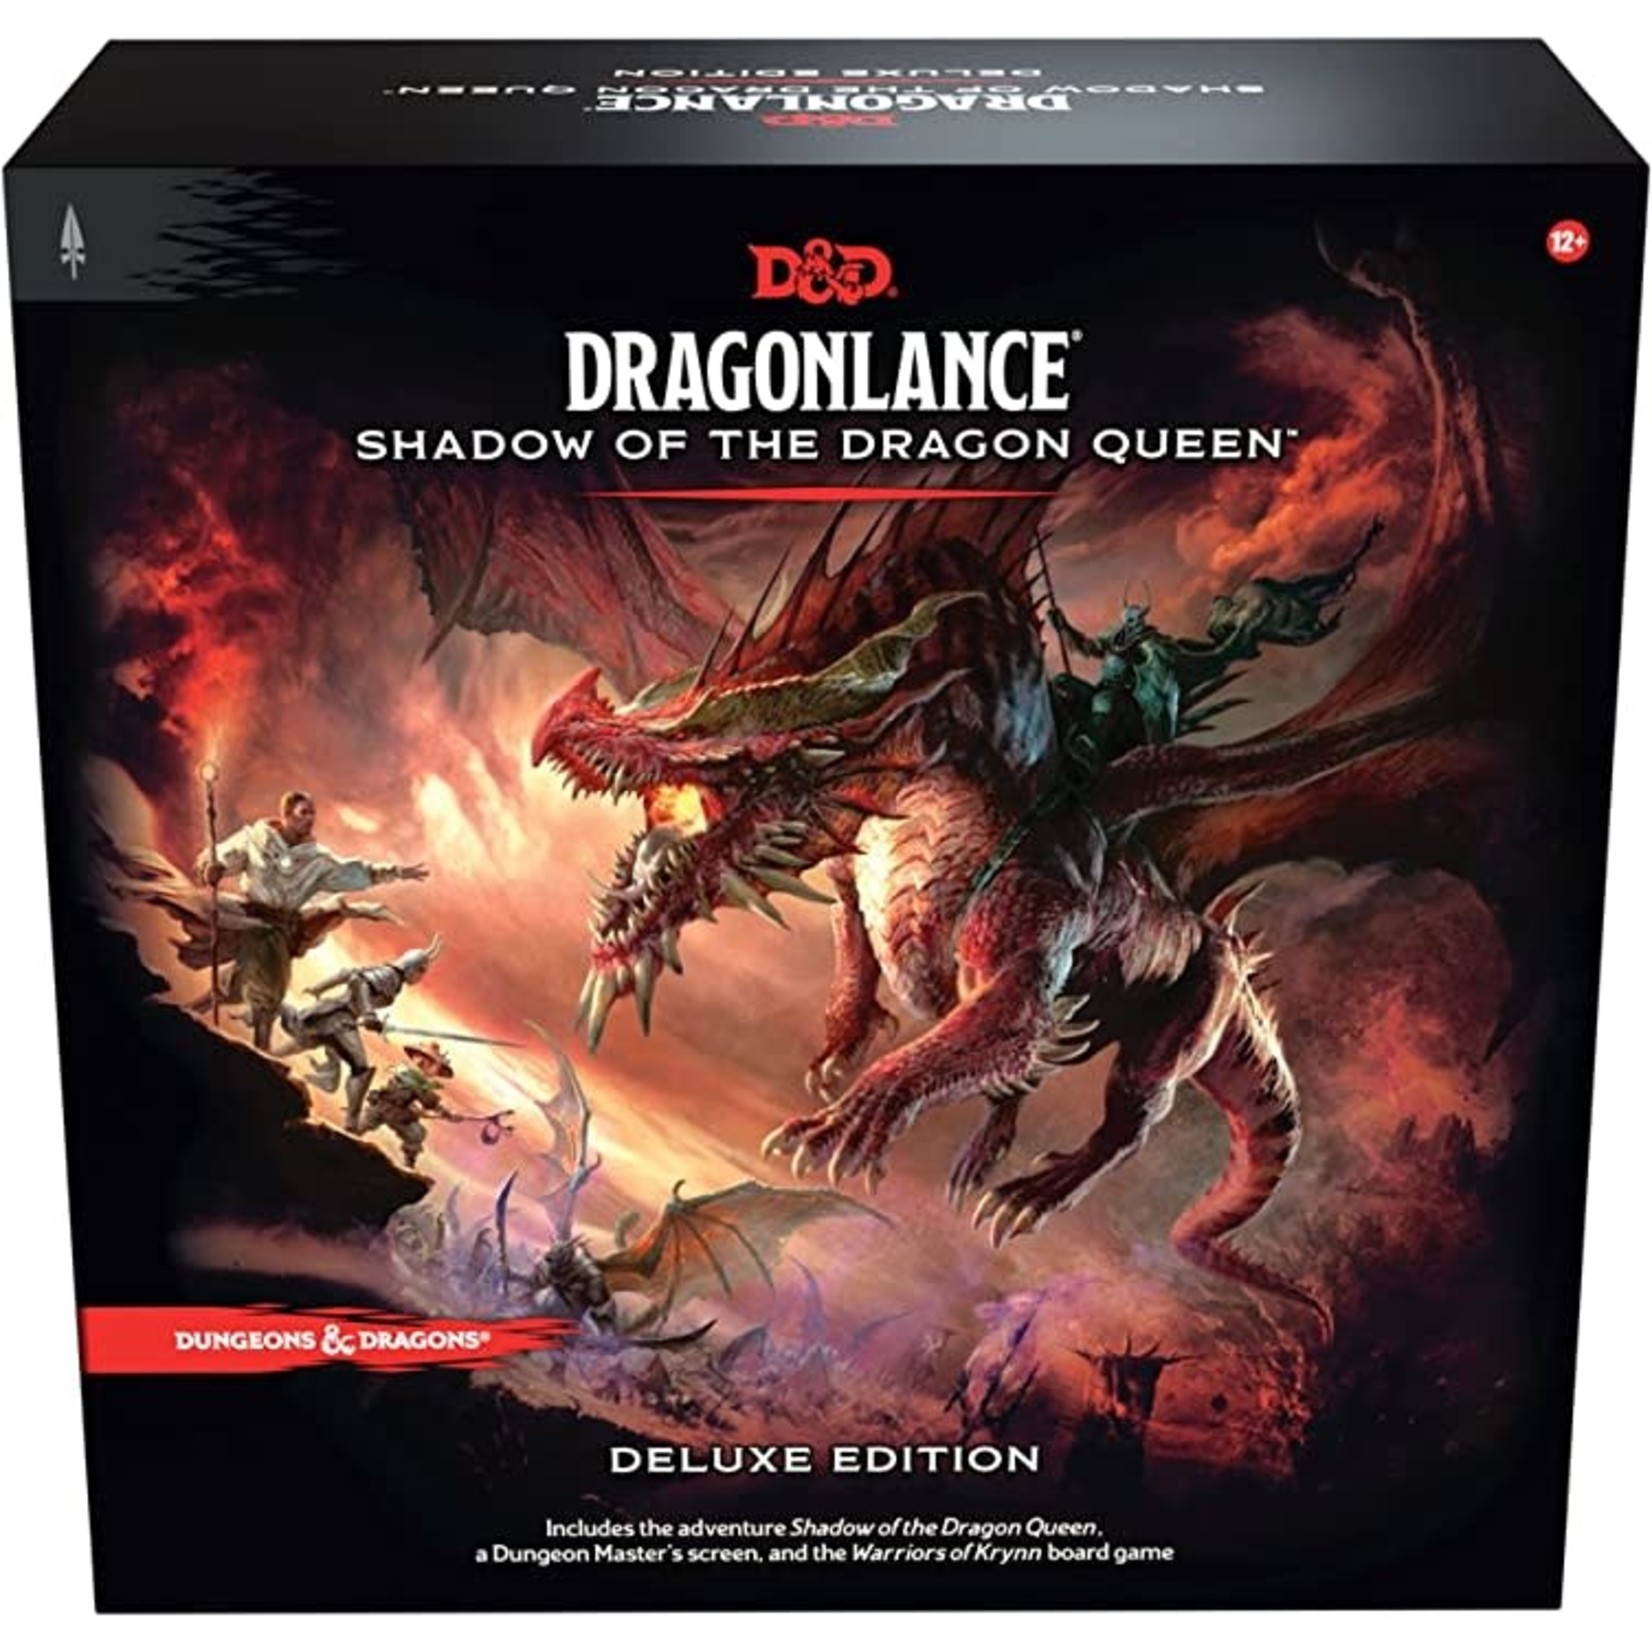 WOTC D&D D&D Dragonlance: Shadow of the Dragon Queen Deluxe Edition